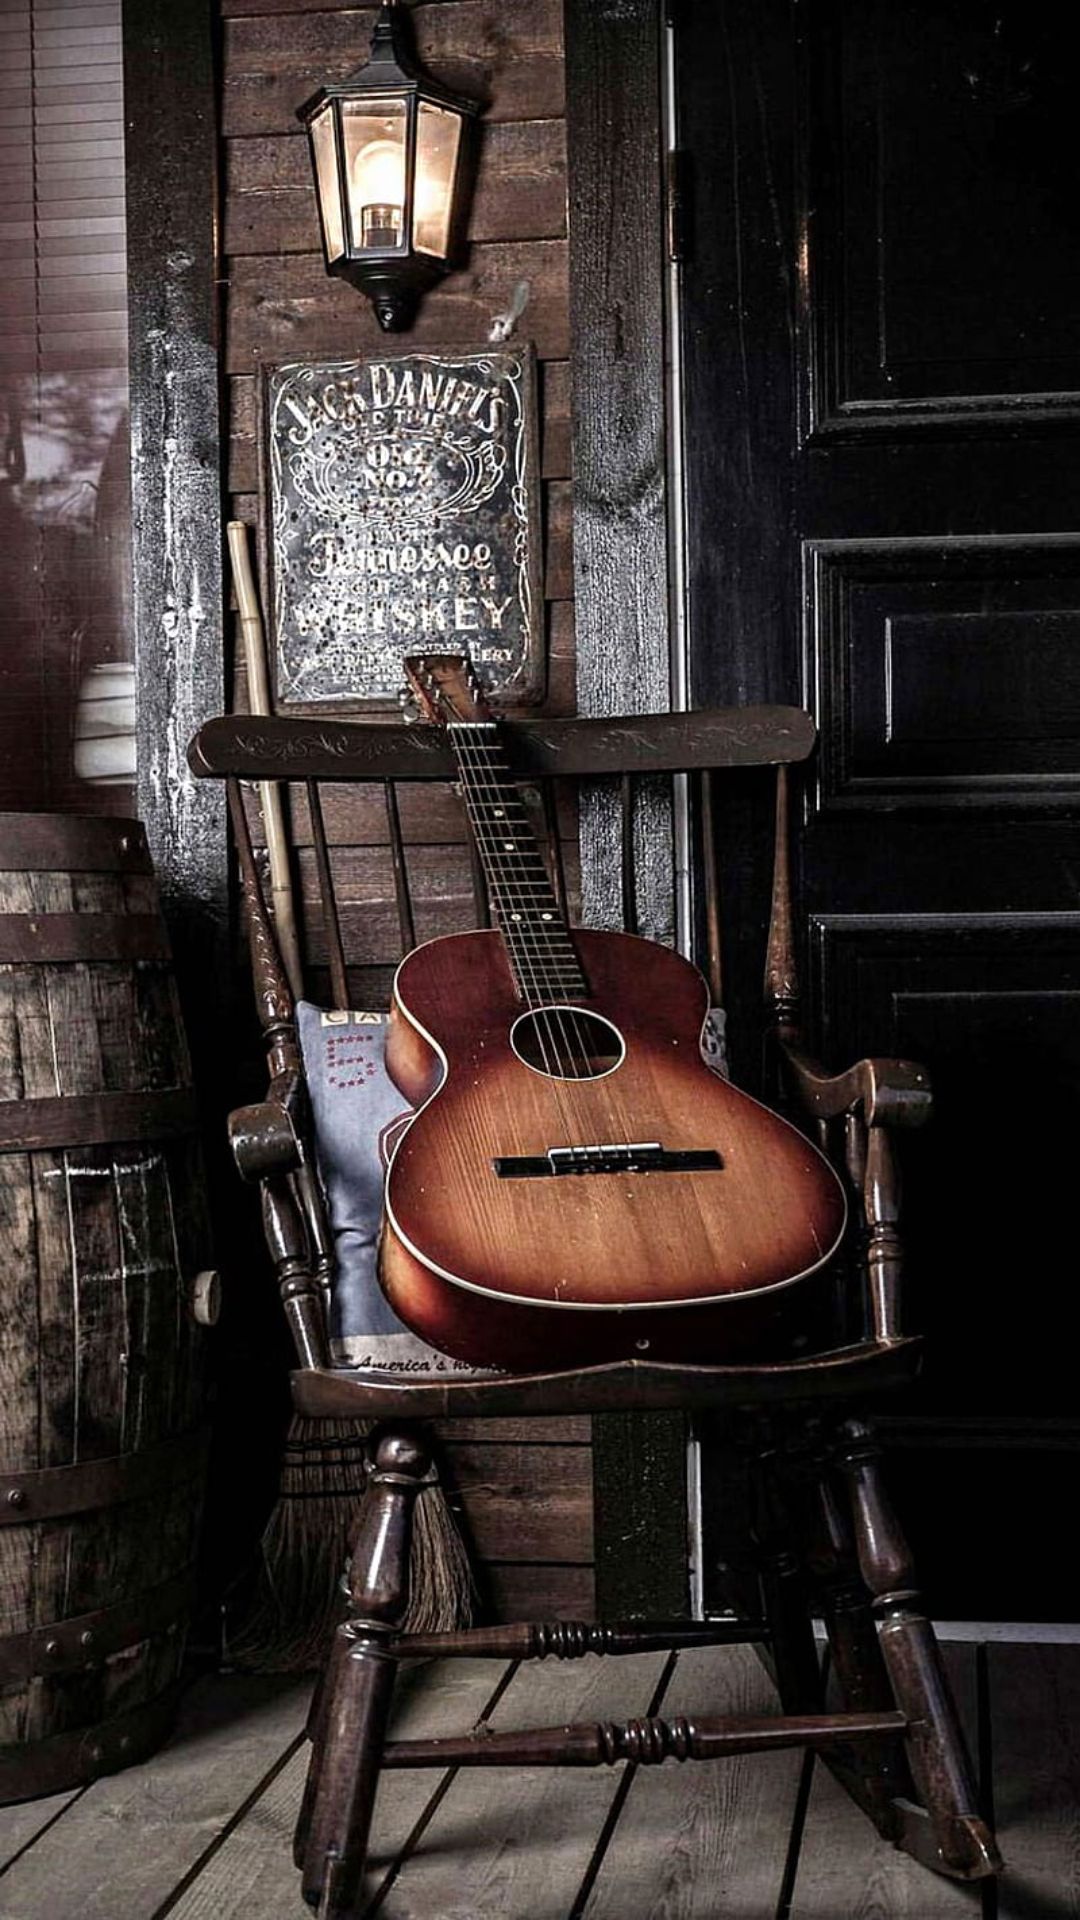 A guitar sitting on top of an old rocking chair - Guitar